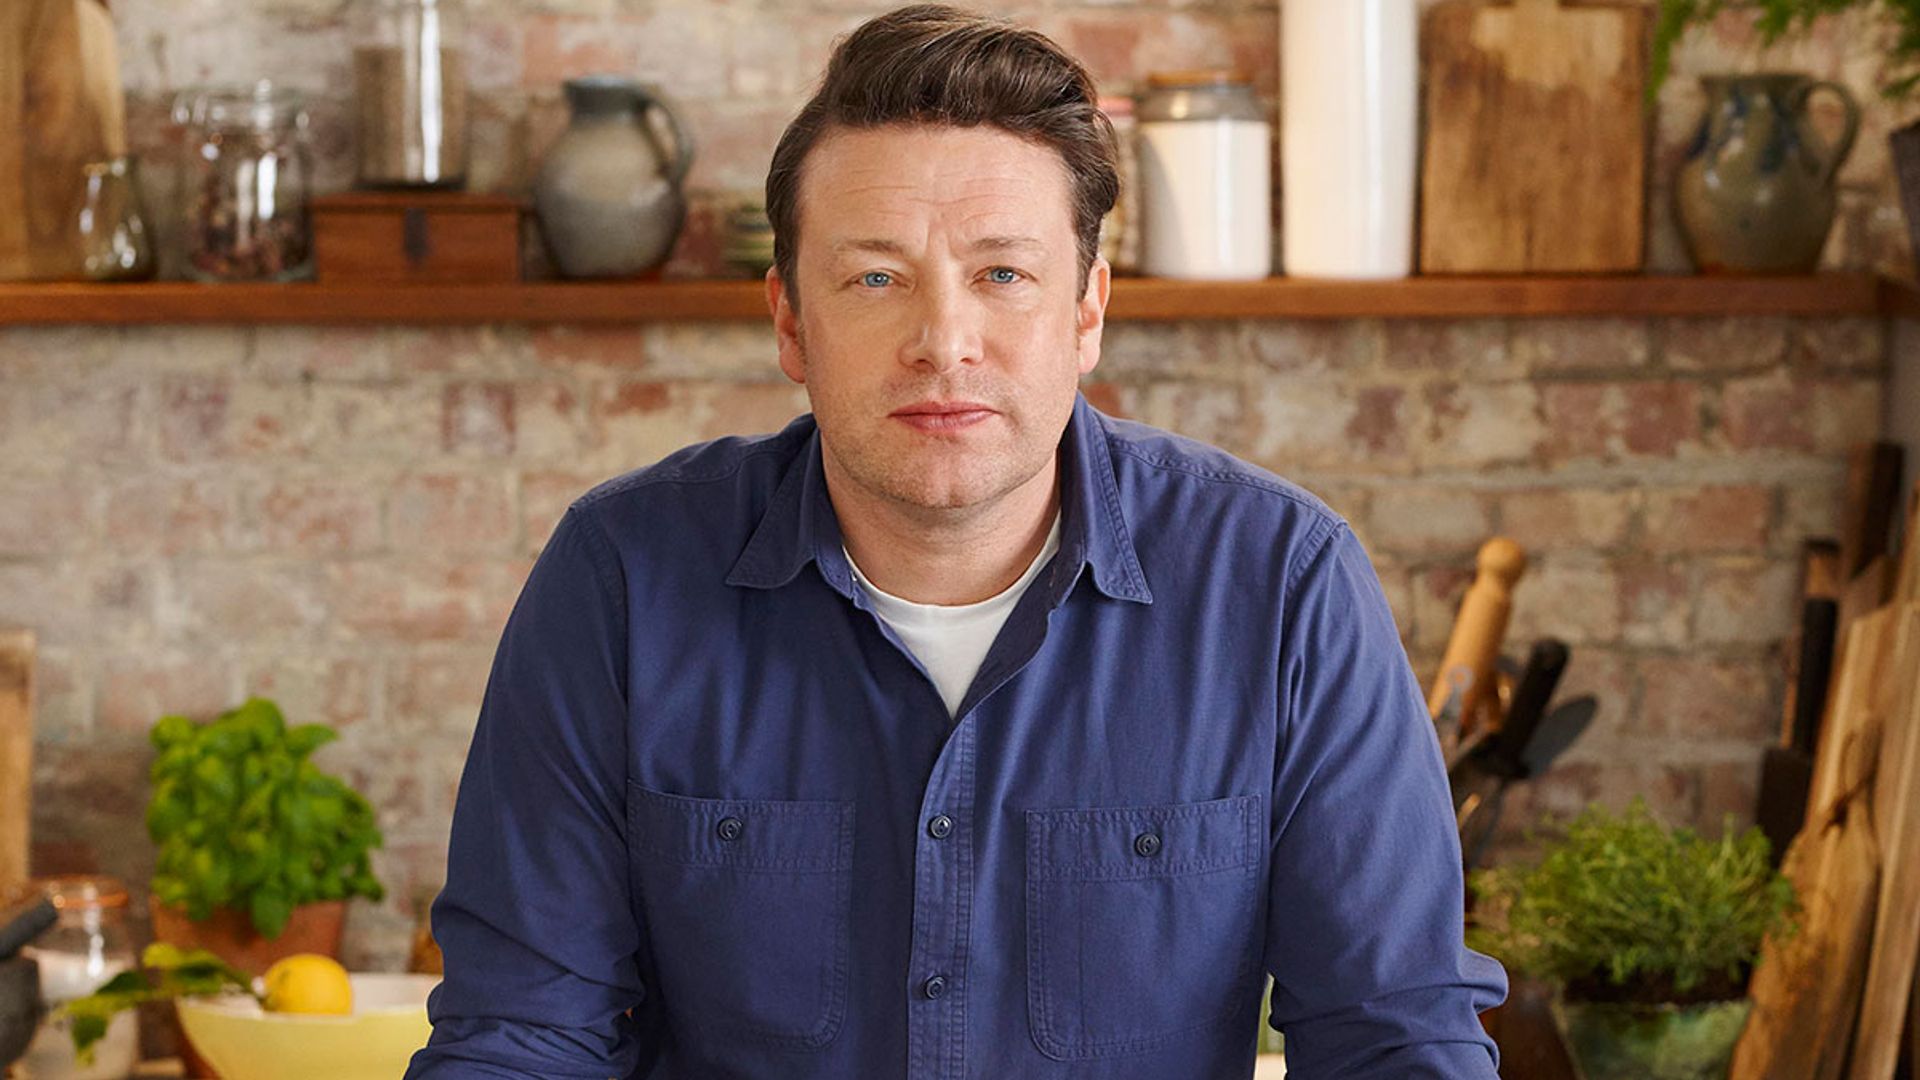 Jamie Oliver lands new TV show - but it's not in the kitchen